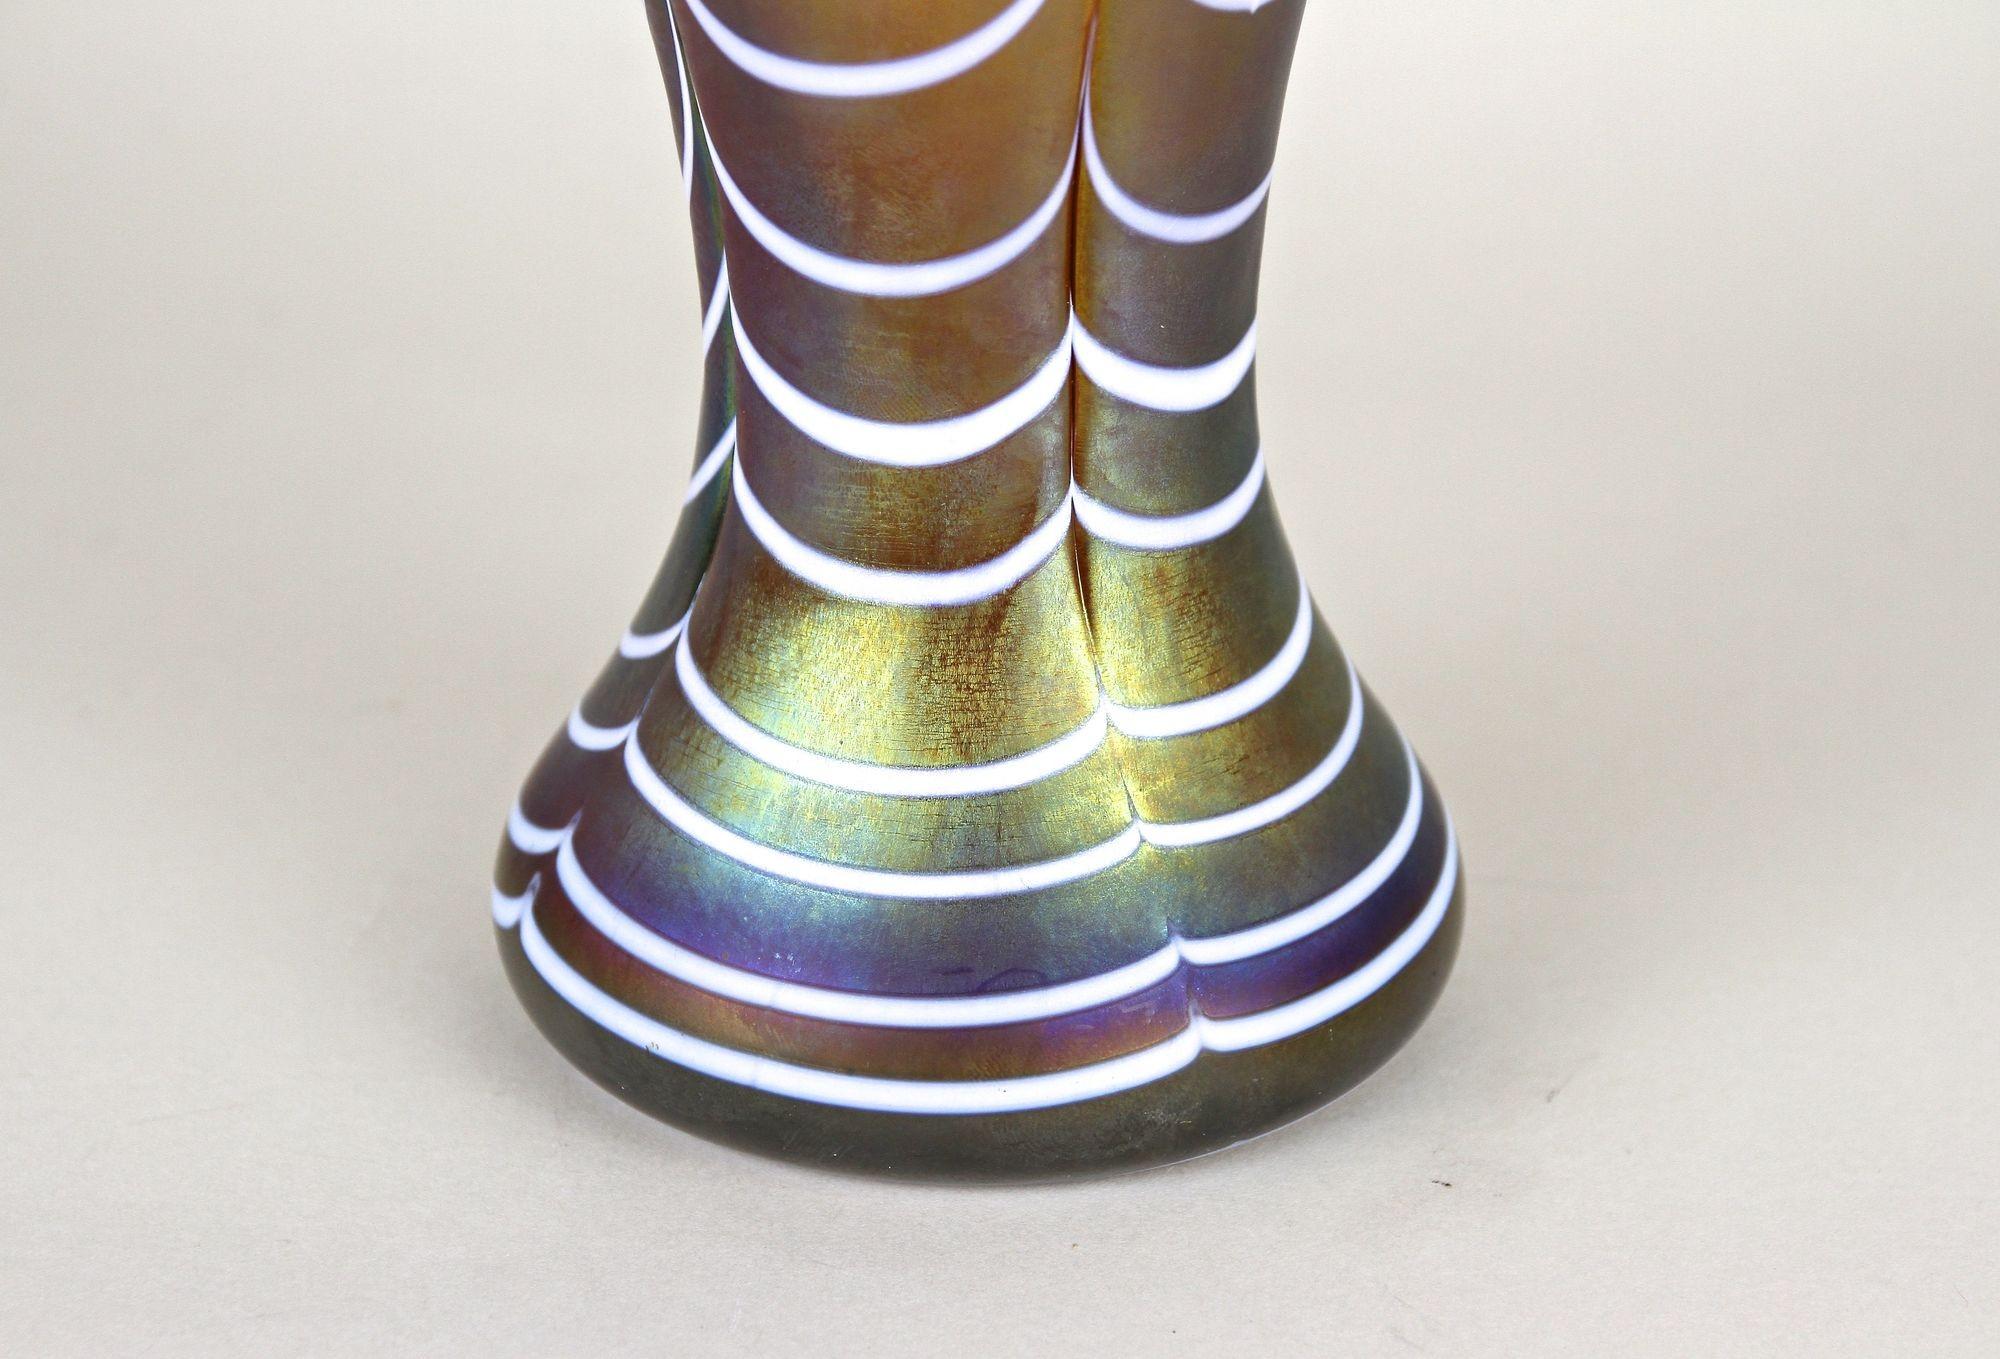 Czech Art Nouveau Iridescent Glass Vase Attributed To Loetz Witwe, Bohemia, ca. 1915 For Sale